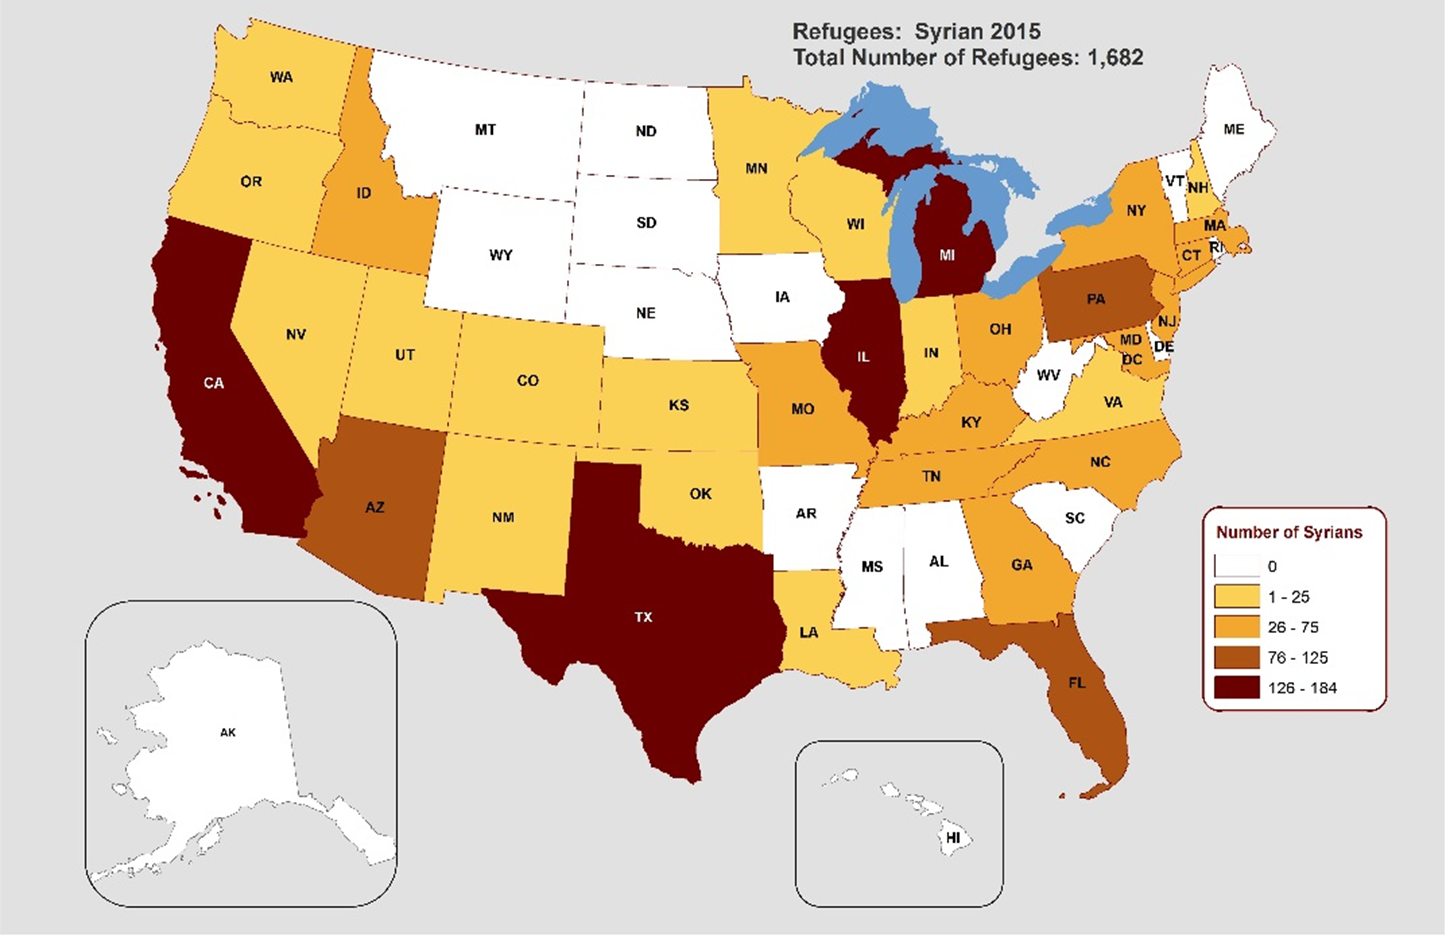 States of Primary Resettlement for Syrian Refugees, FY 2015